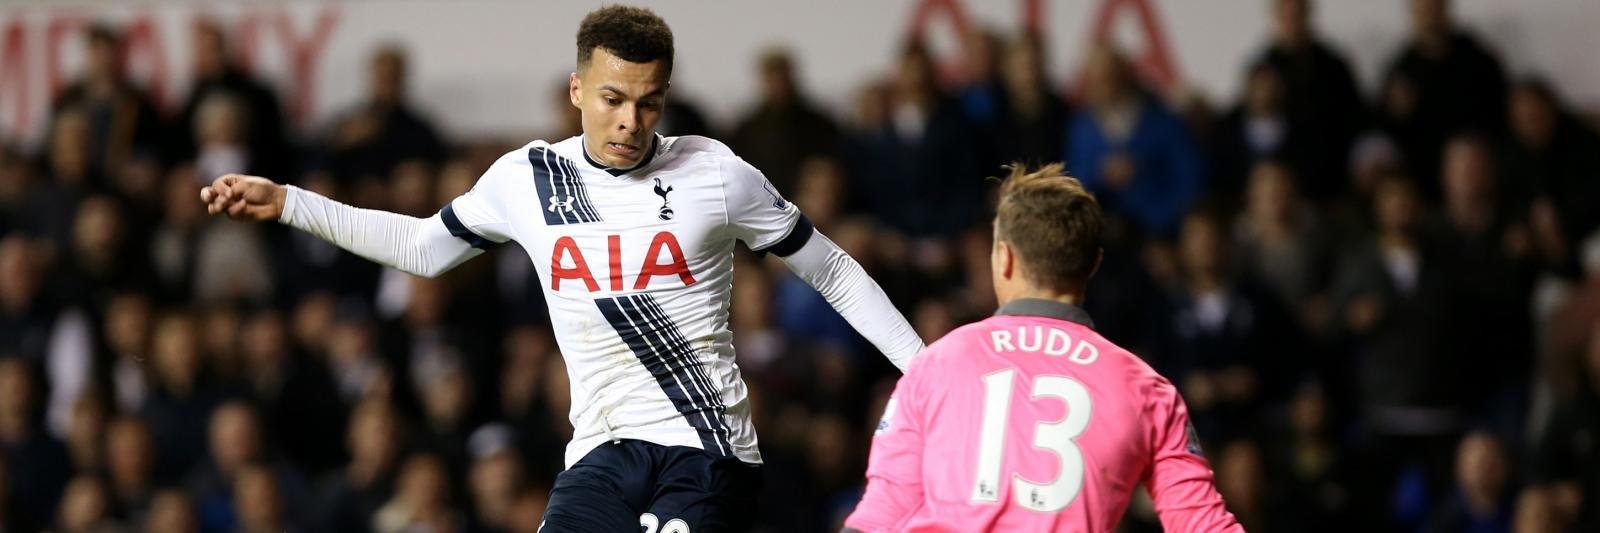 Profile: PFA Young Player of the Year, England and Tottenham’s Dele Alli